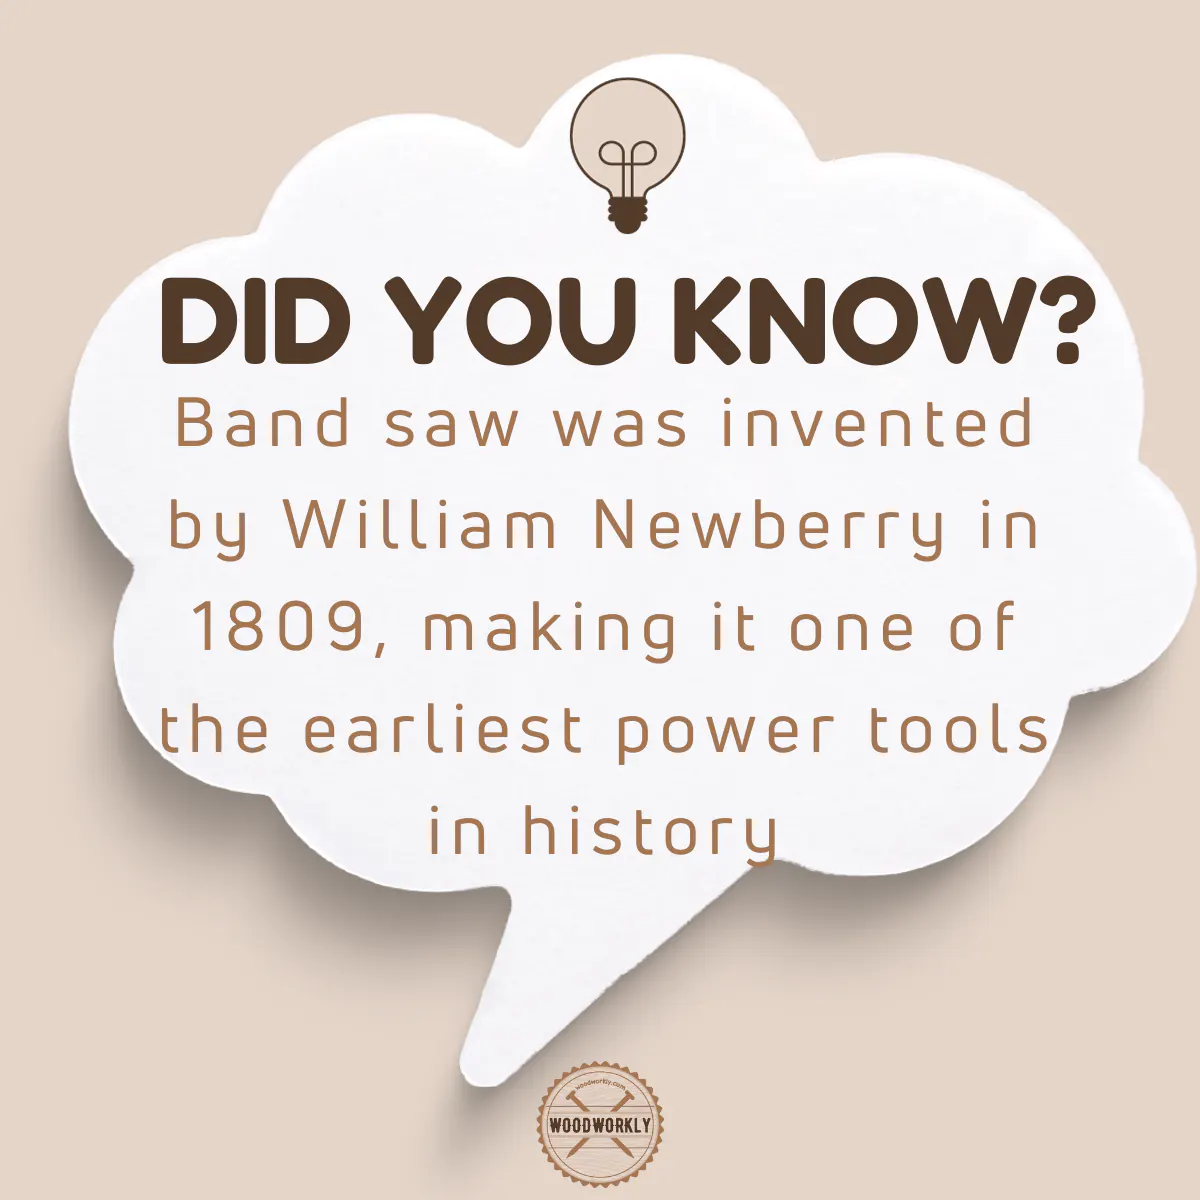 Did you know fact about the band saw